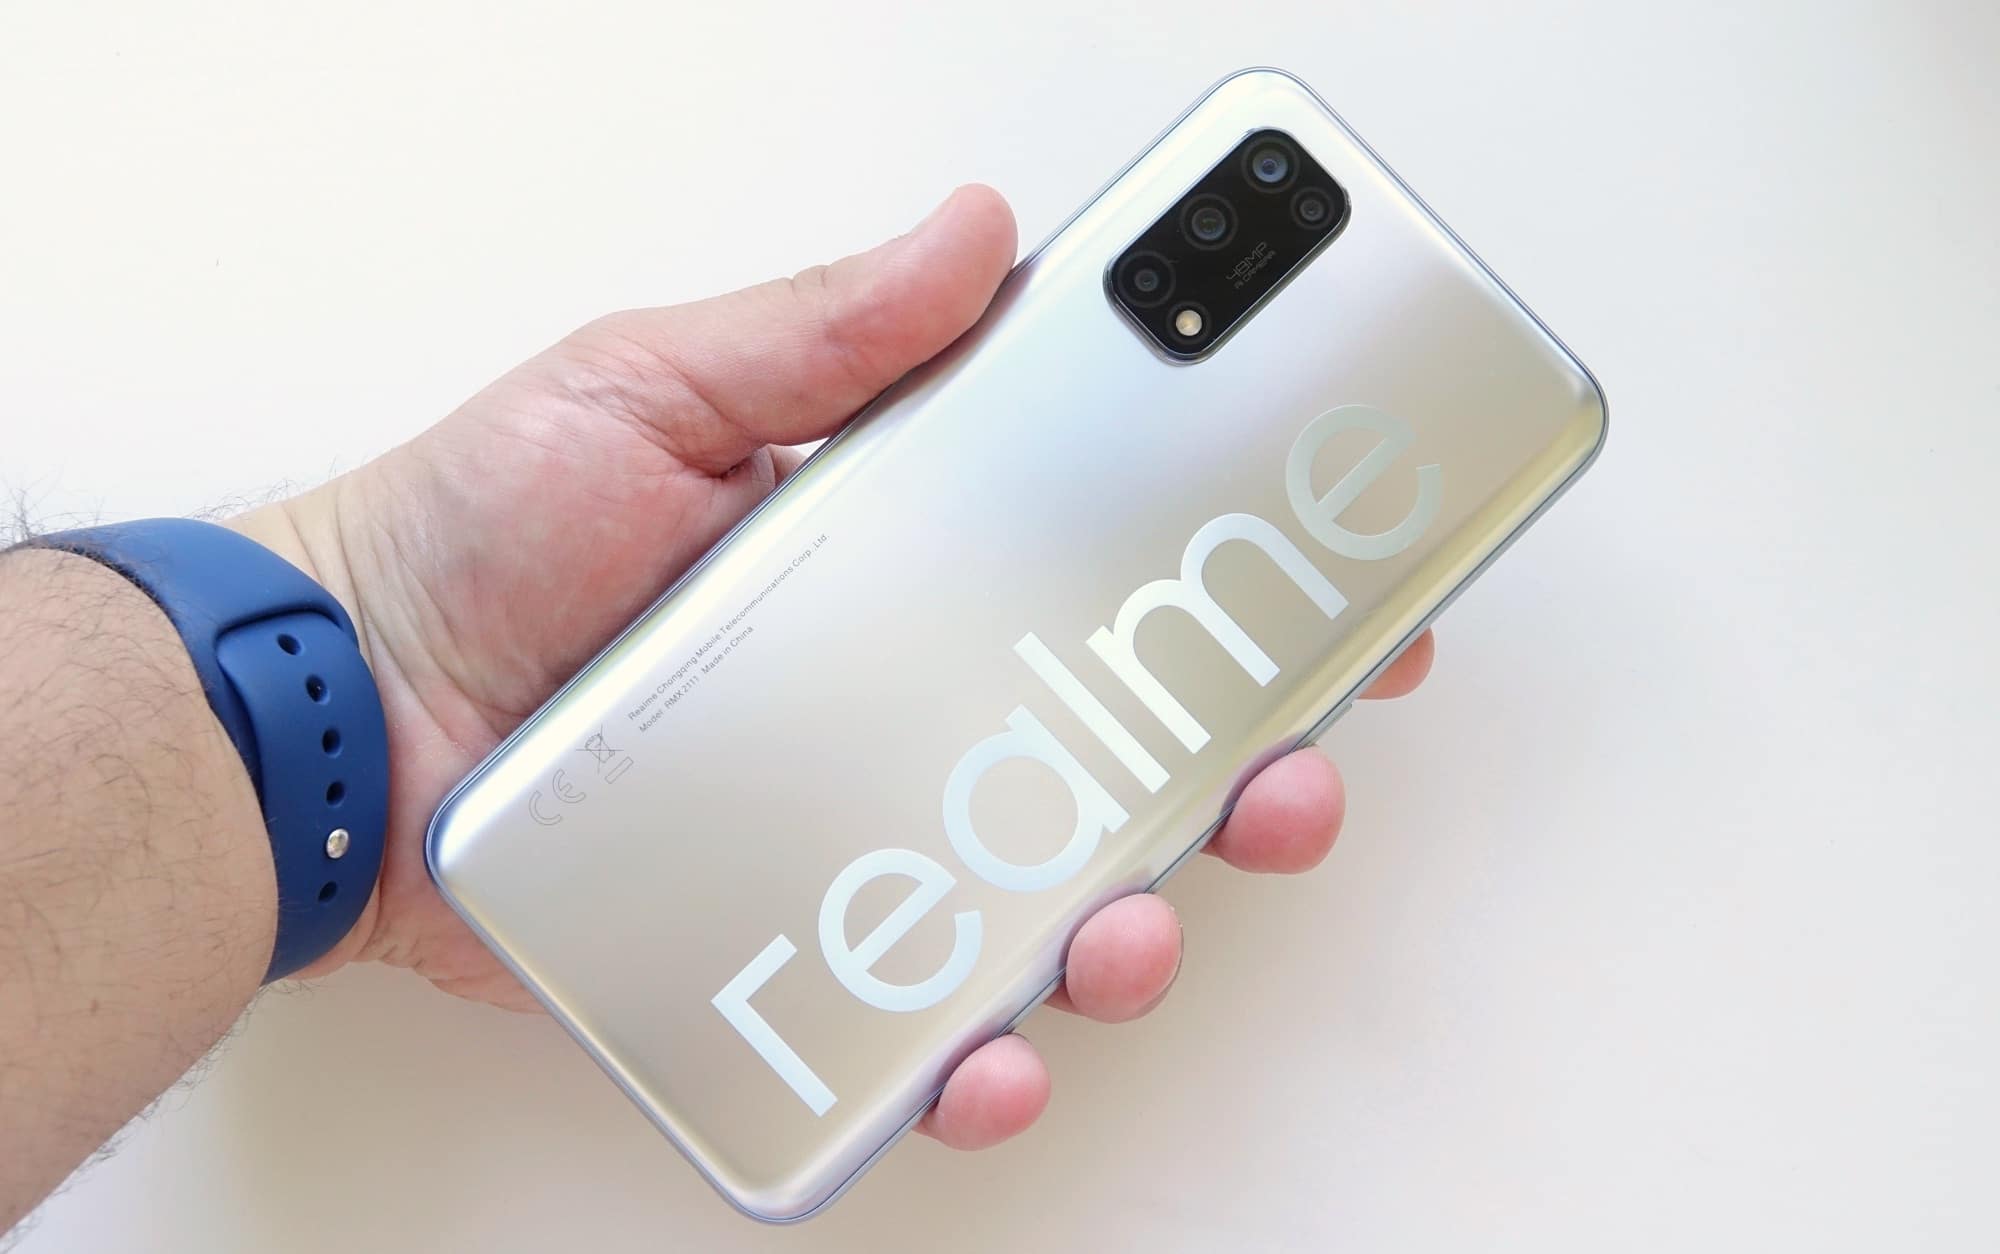 Holding the silver 7 5G, you'll find a pretty sizeable "Realme" brand waiting for you.